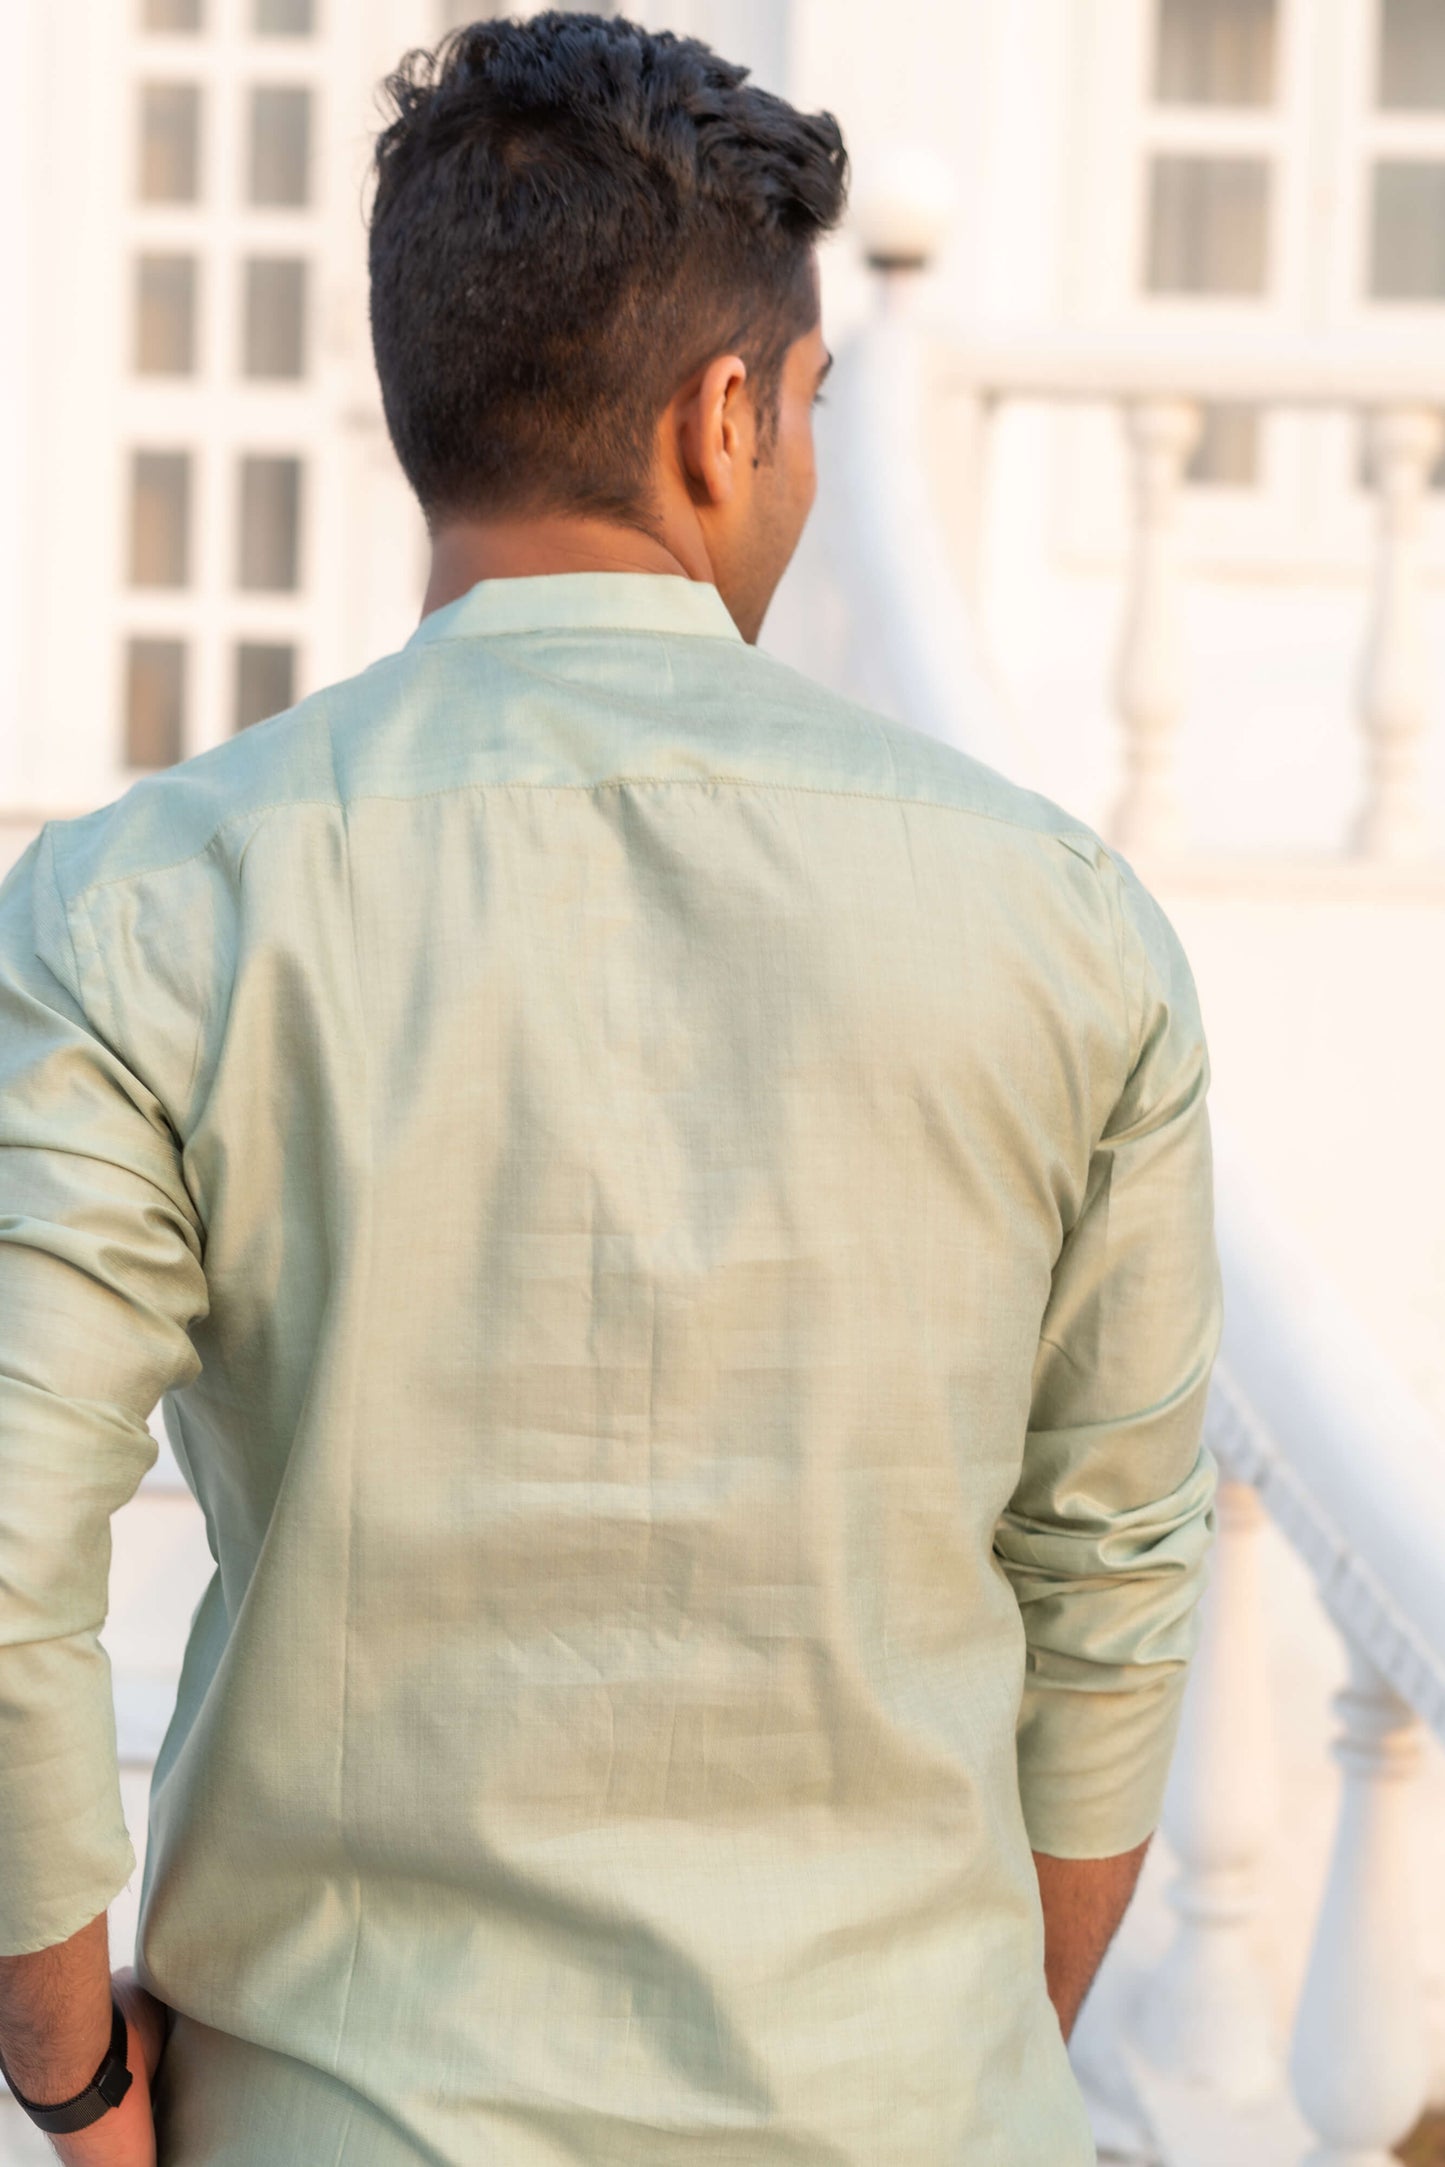 The Solid Short Kurta In A Sea Green Colour